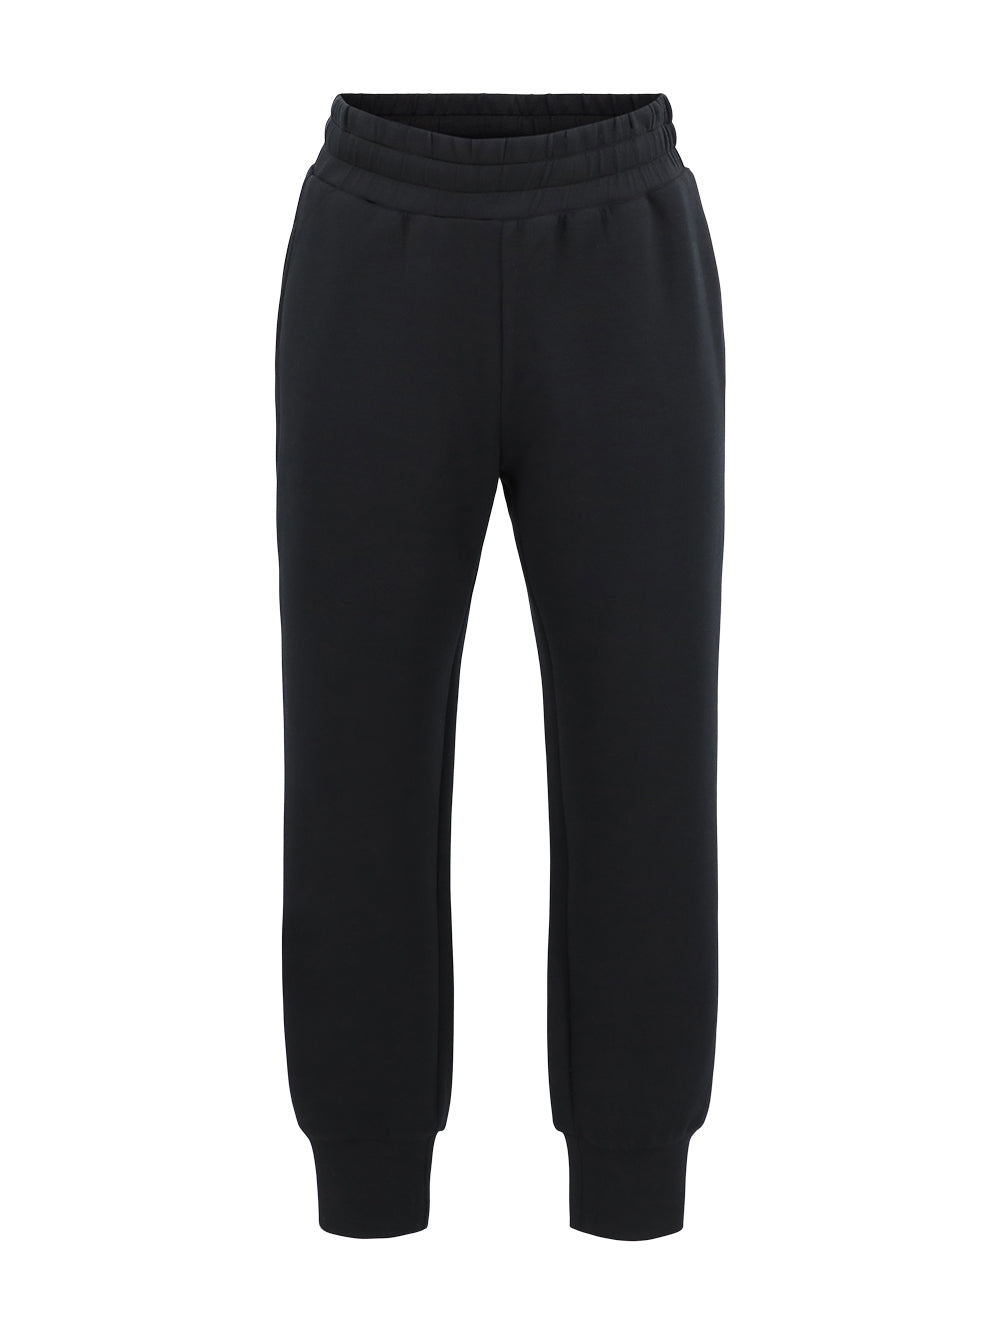 Varley  Slim Cuff Pant Black - Tryst Boutique